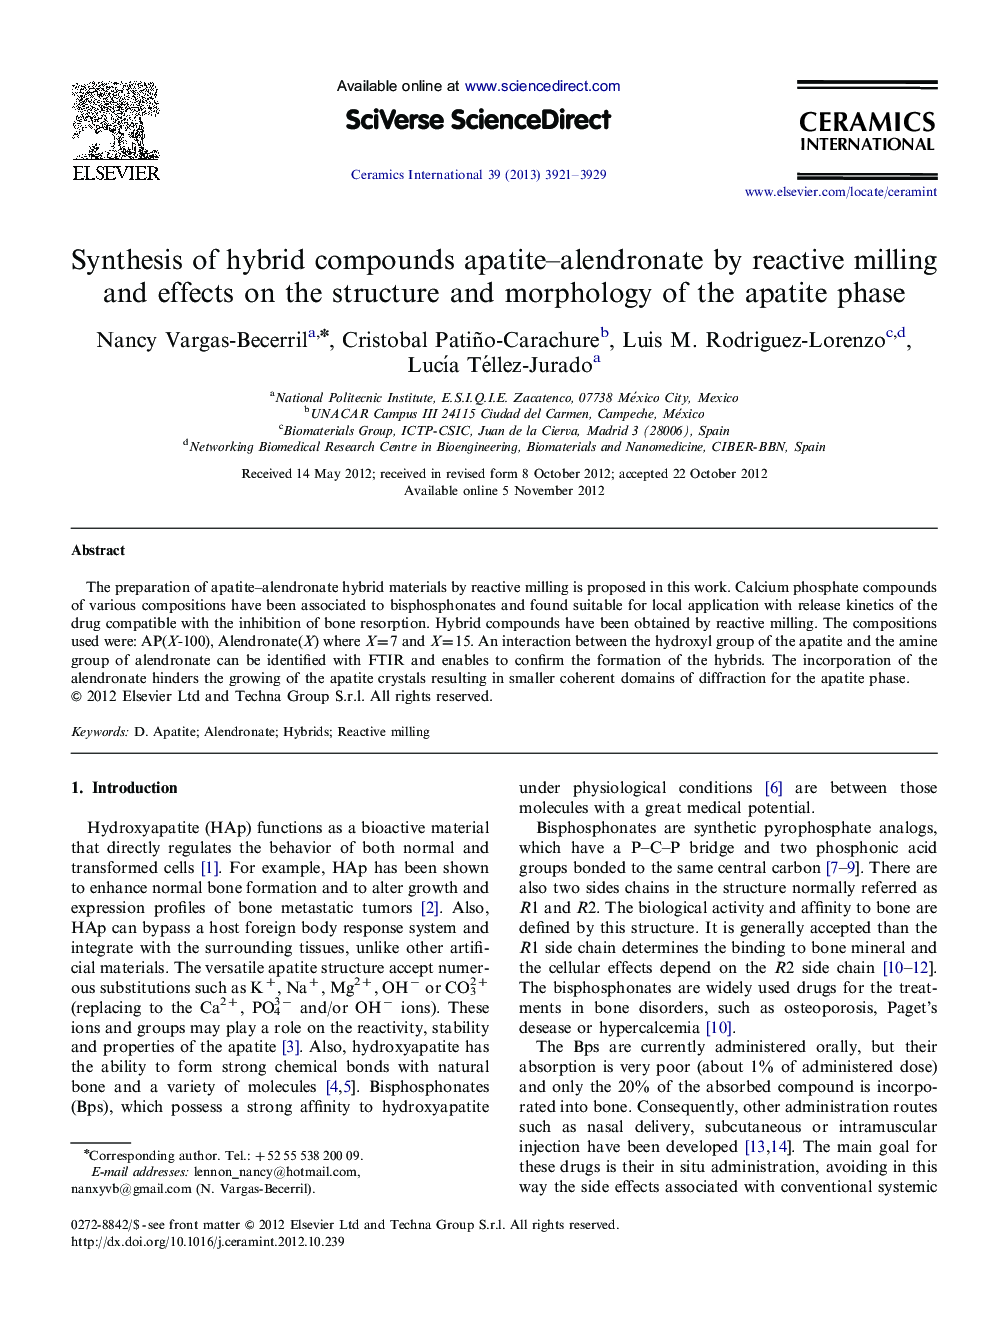 Synthesis of hybrid compounds apatite–alendronate by reactive milling and effects on the structure and morphology of the apatite phase